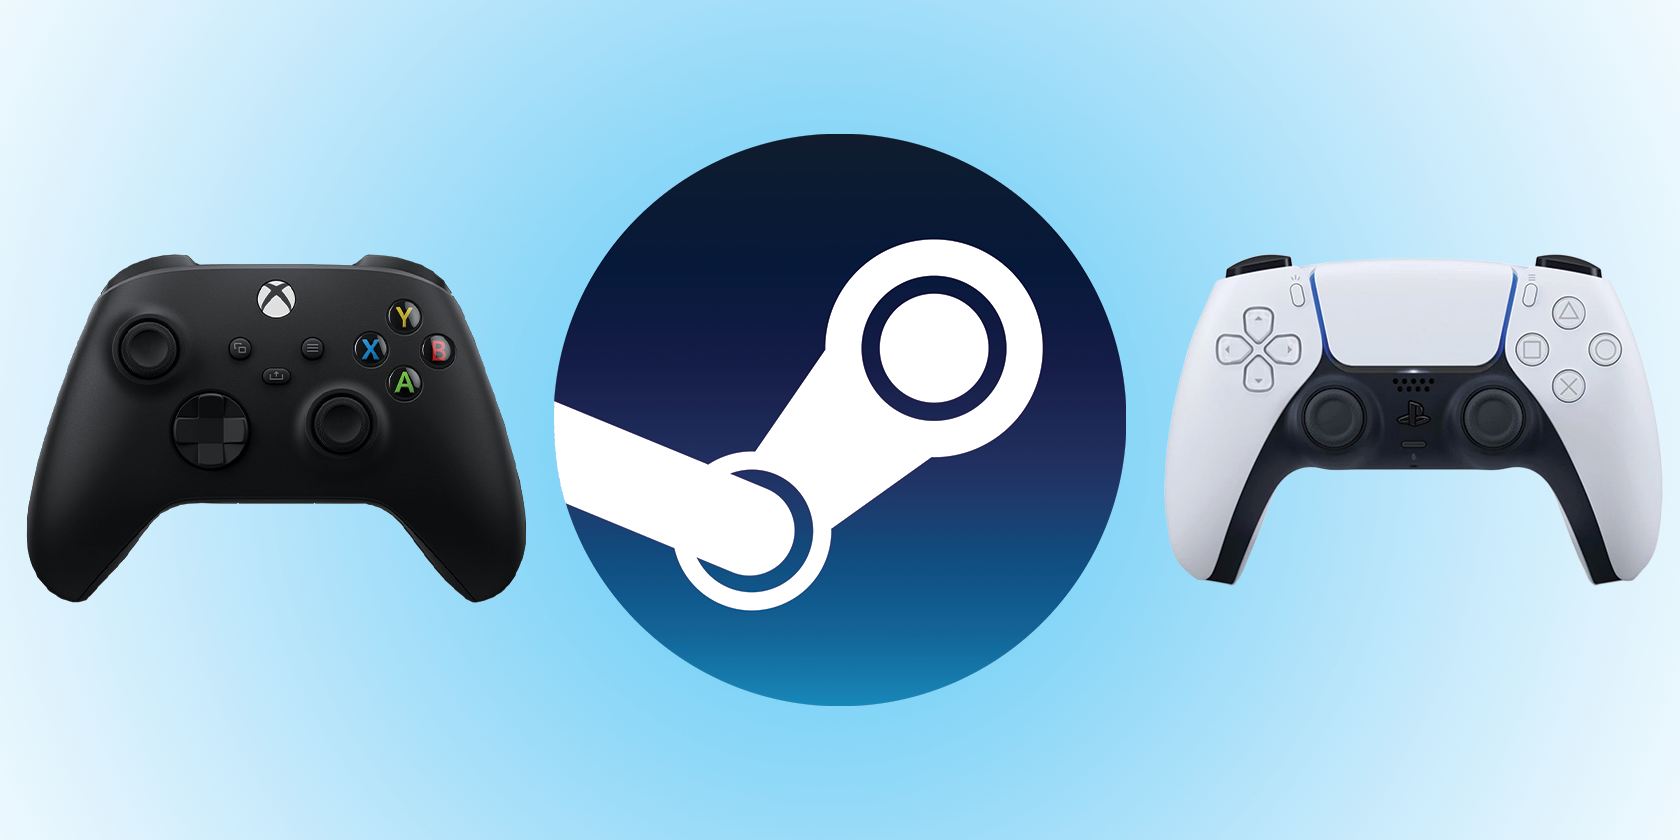 android tv steam link controller